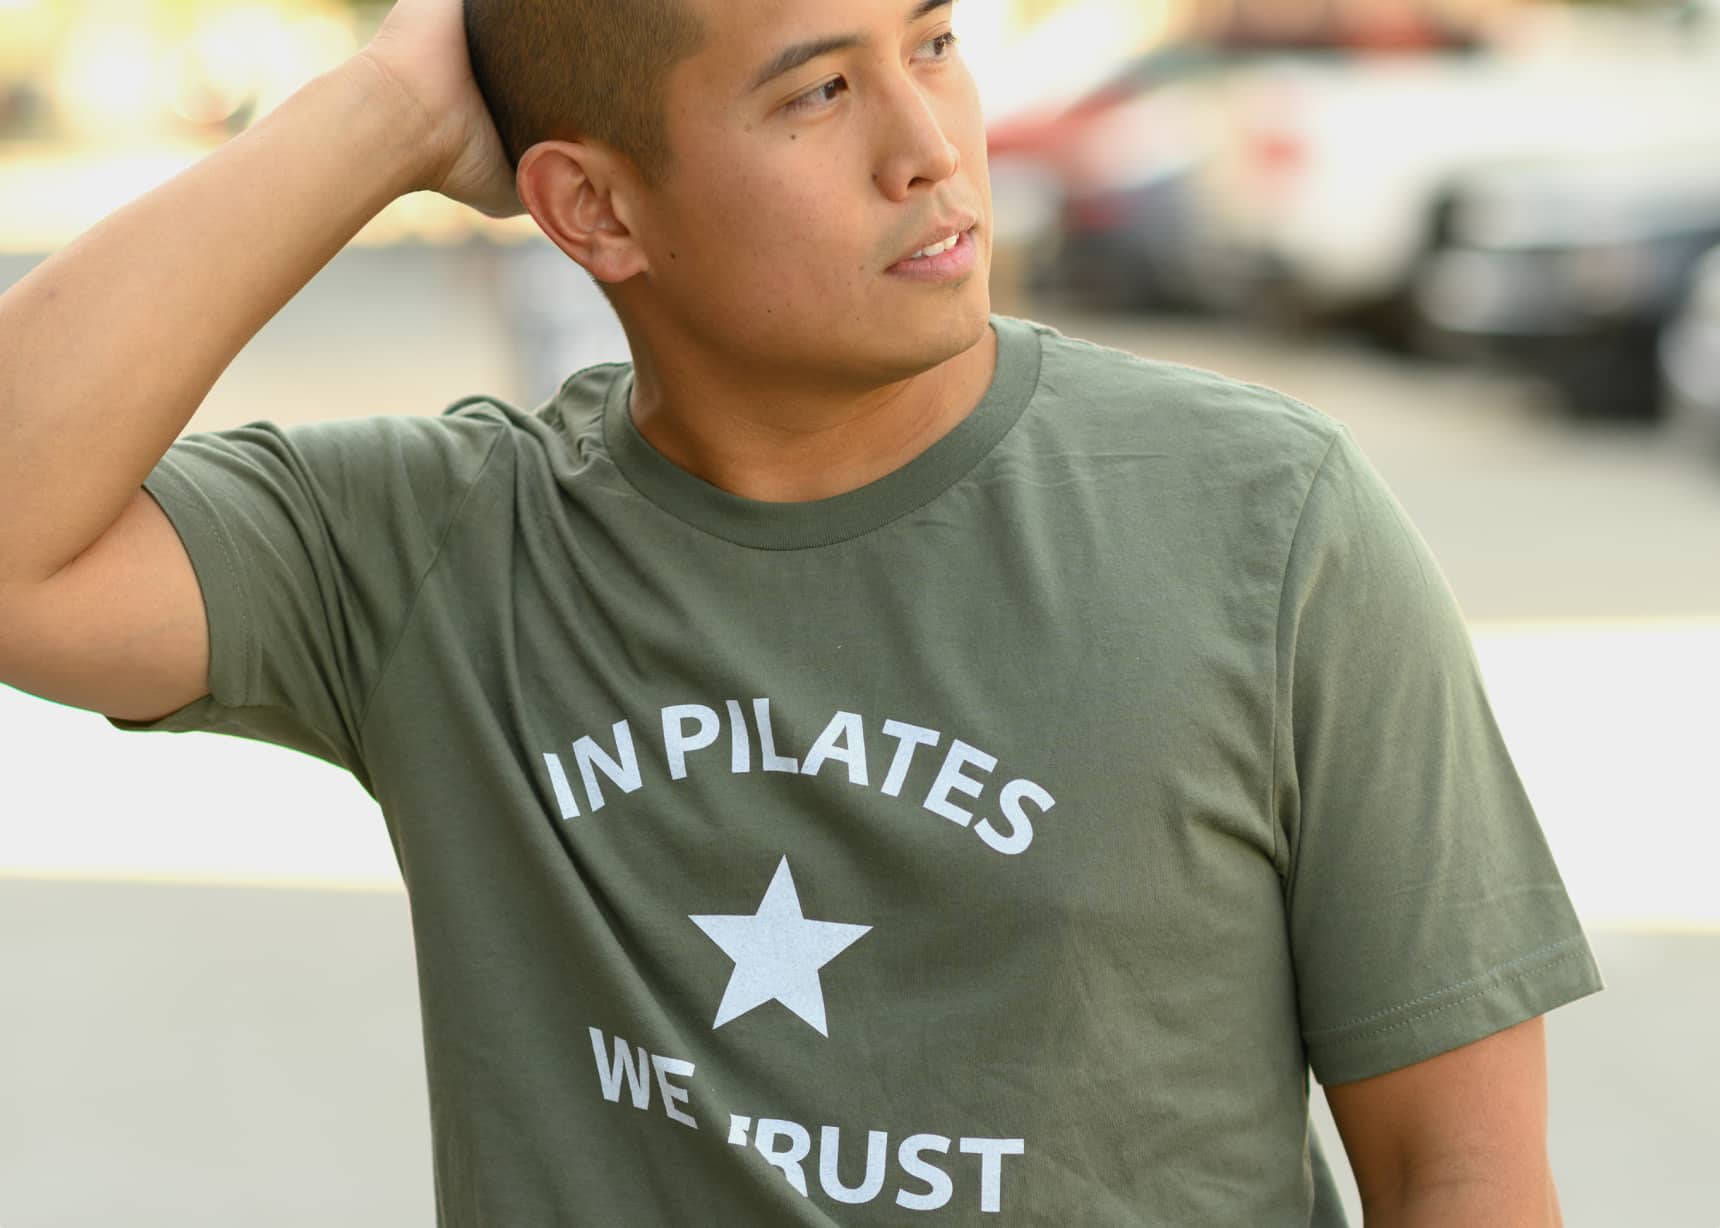 “In Pilates we Trust” T-shirt by Balanced Body